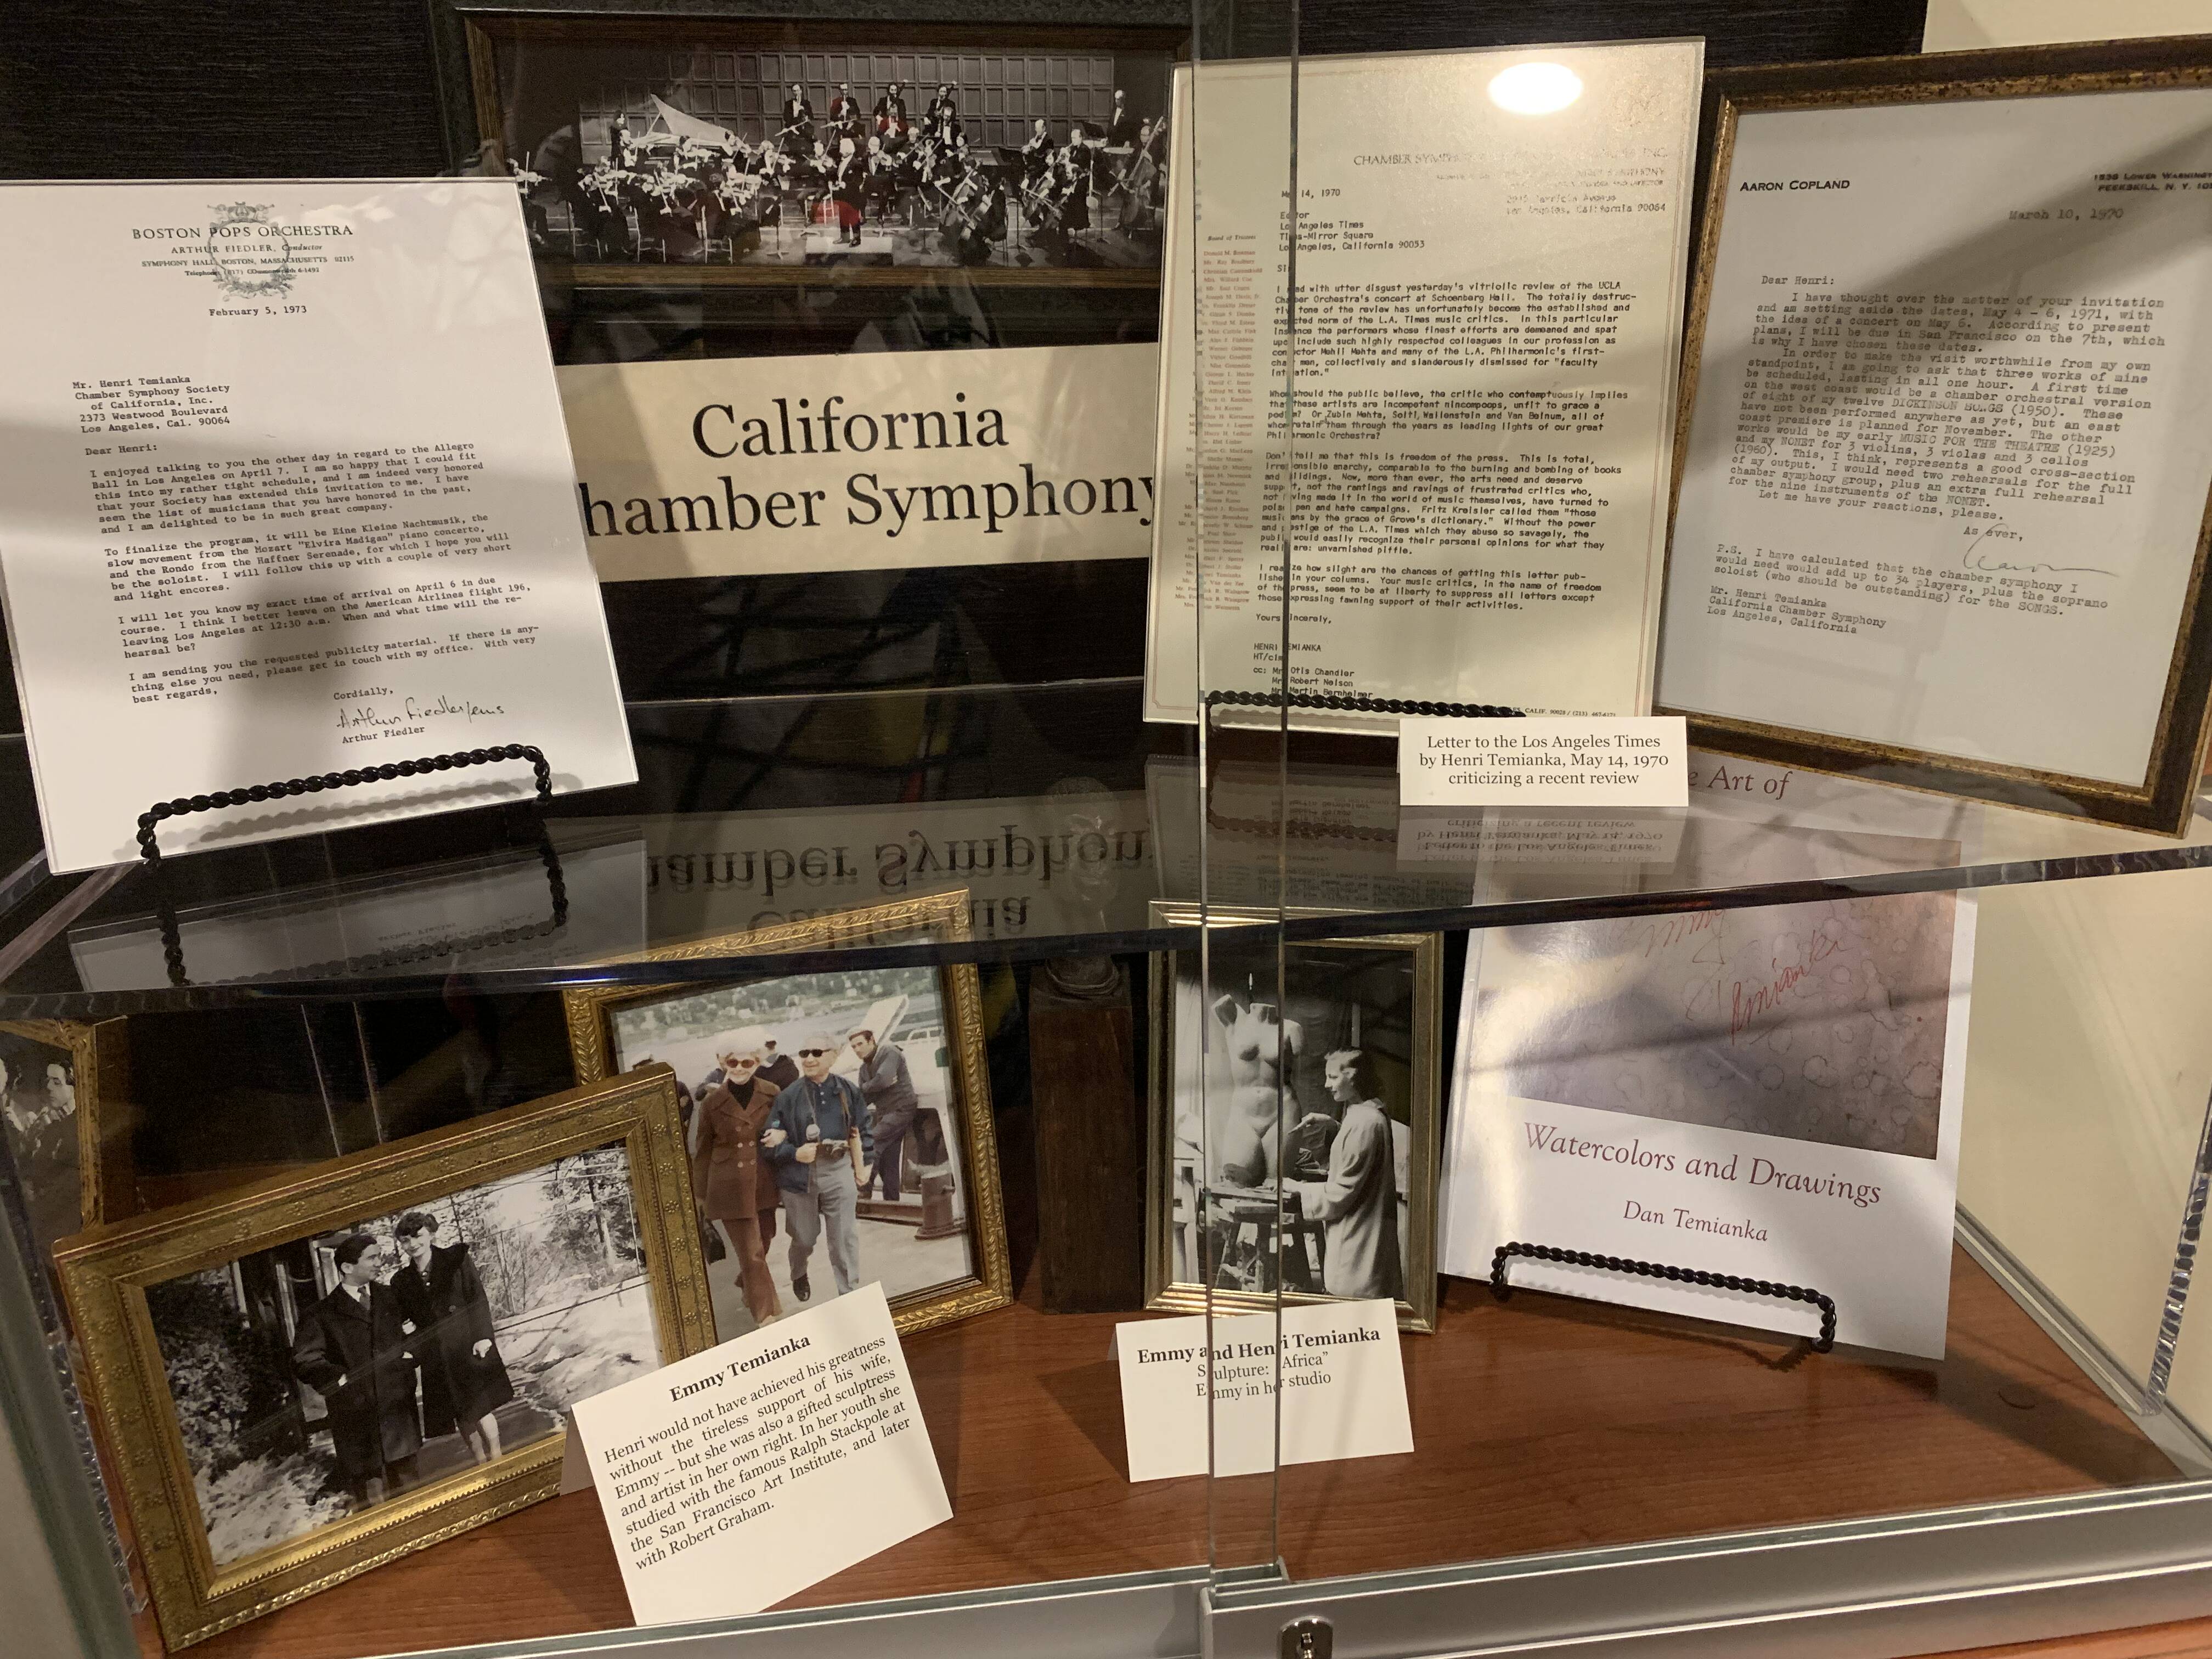 Photos and letters on display in the Temianka study room.